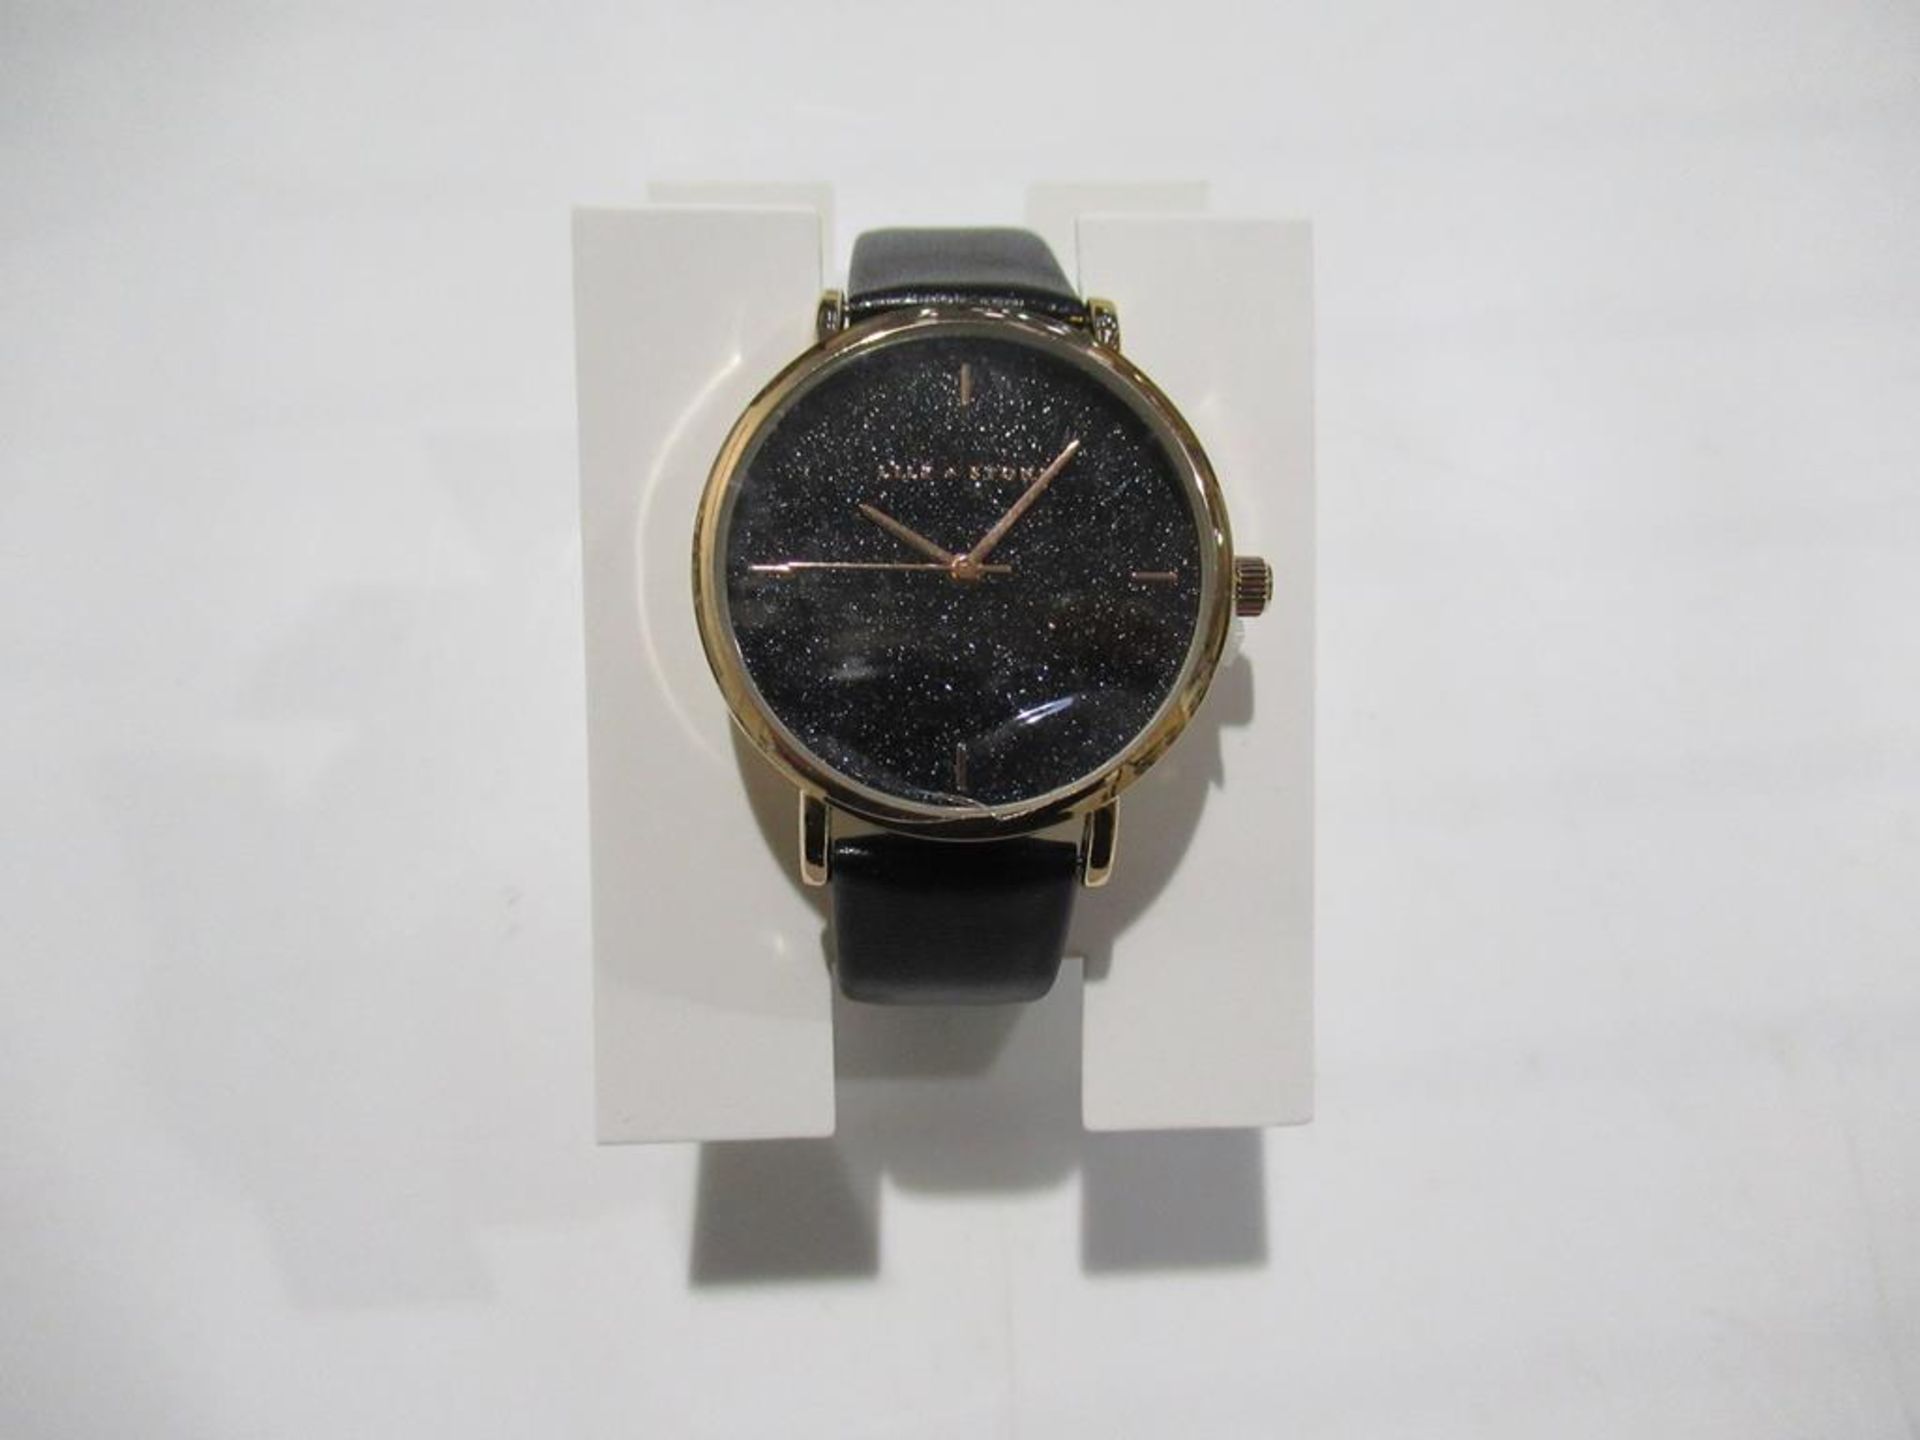 1x box of Lily and Stone 'San Francisco' watches- unopened (65) total approx. RP £1750 - Image 2 of 3